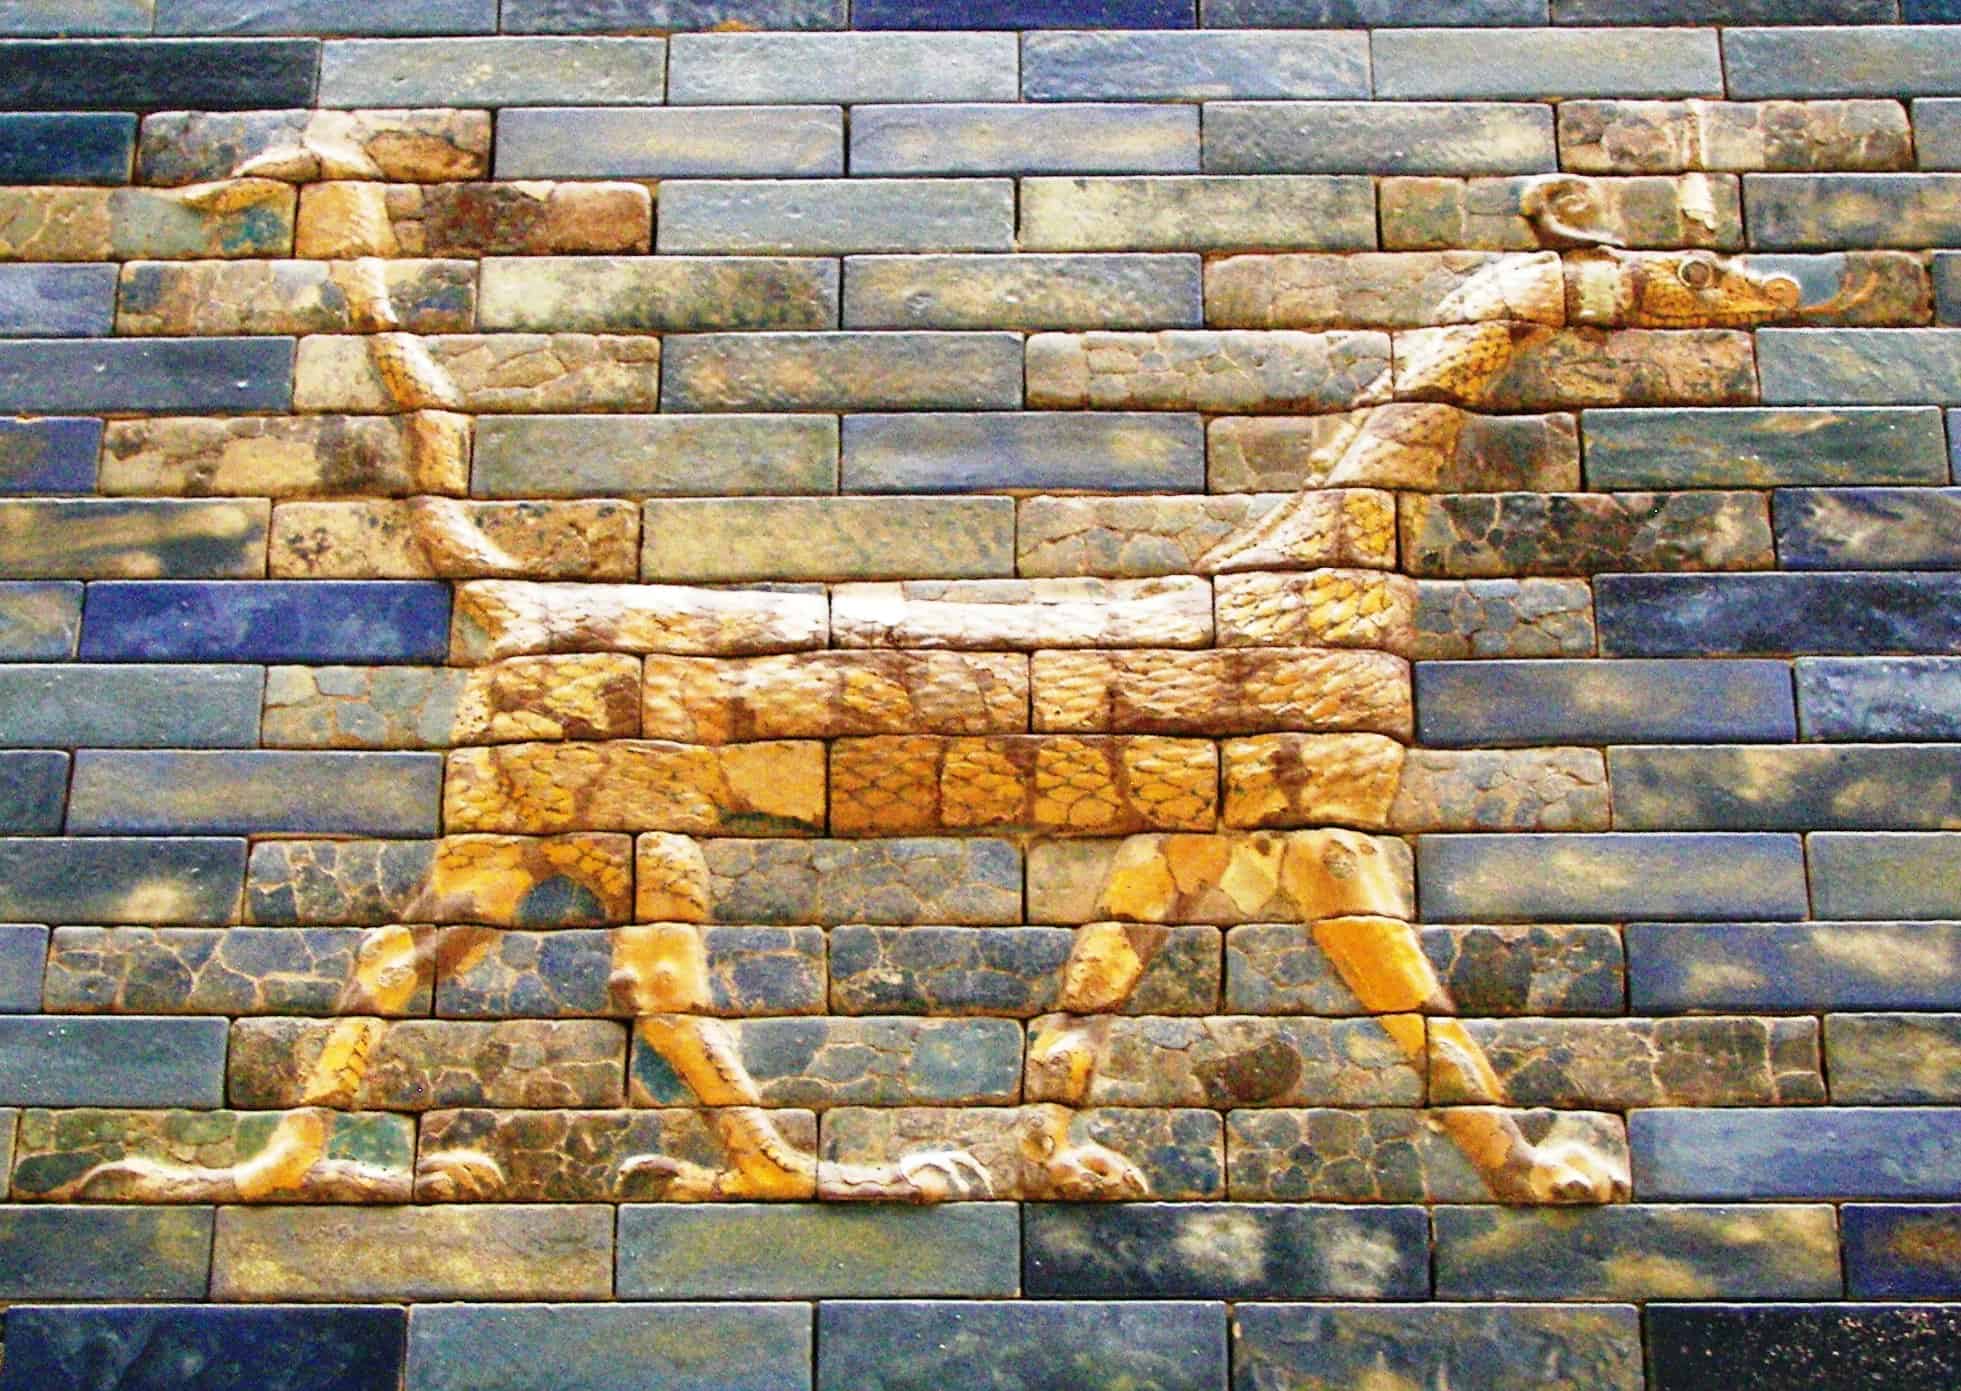 Mushkhushu - A Mesopotamian deity worshipped for creating humans and his hybrid dragon –in the Bible?